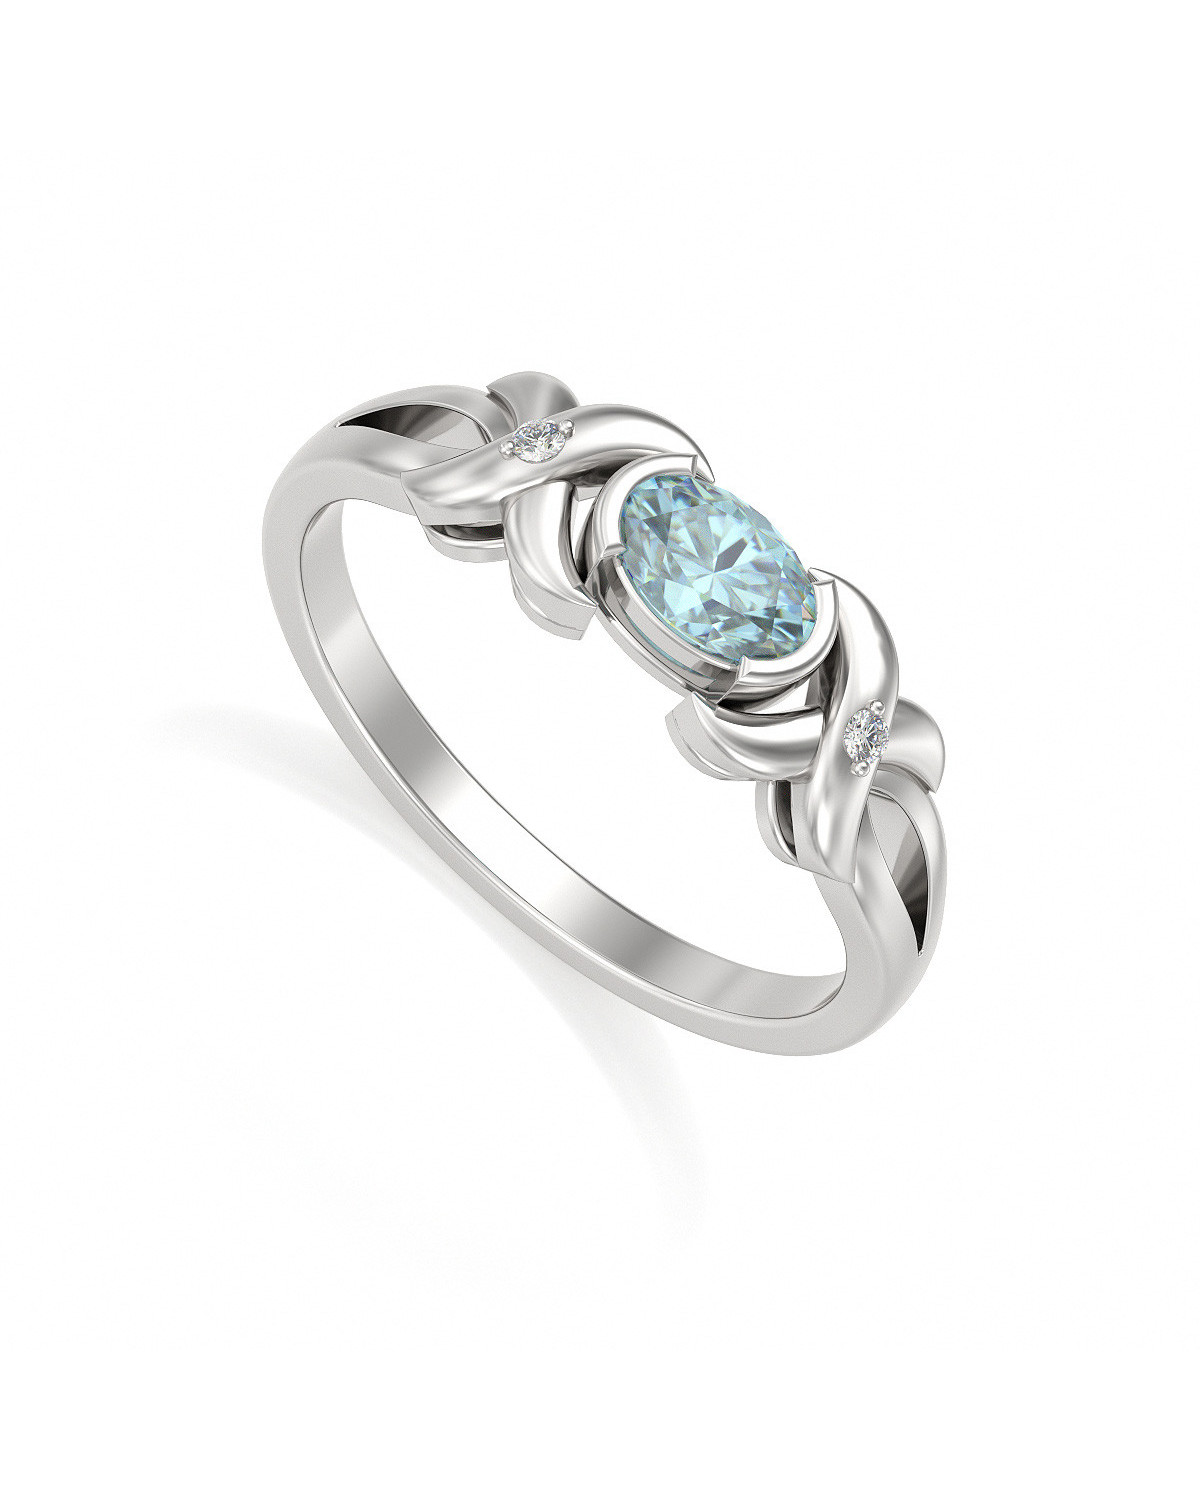 925 Sterling Silver Aquamarine and Diamonds Ring